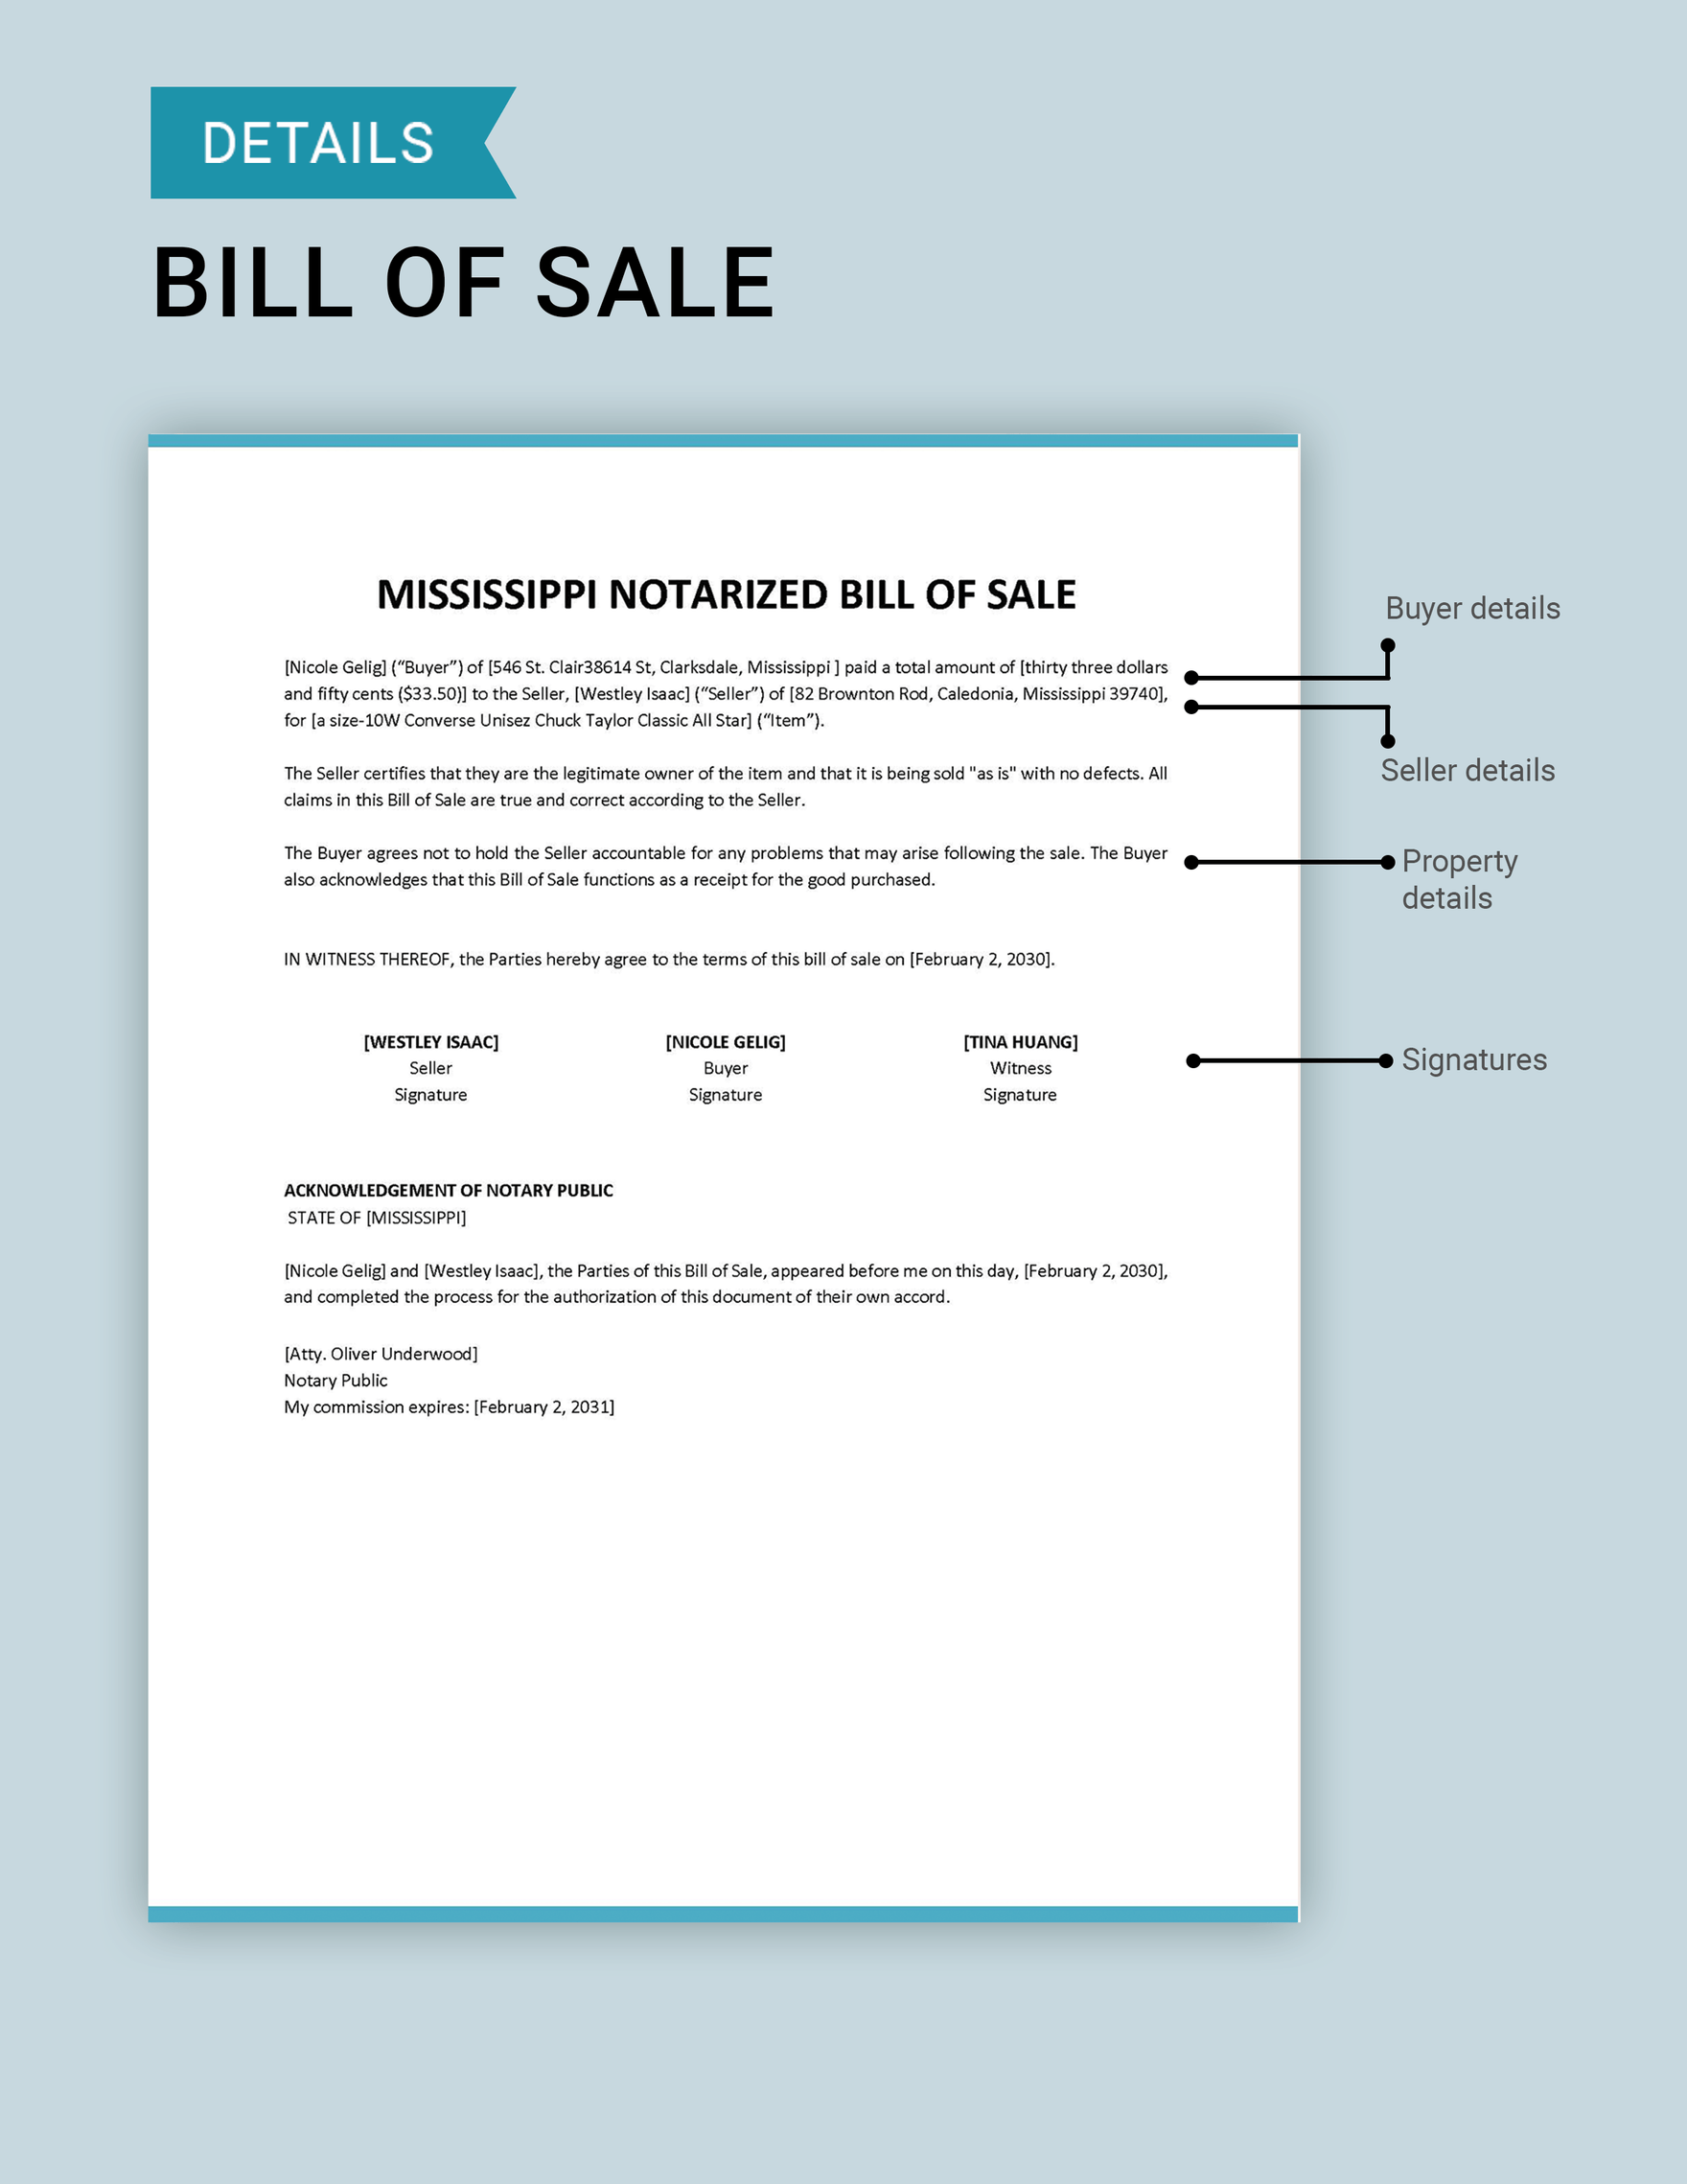 does a bill of sale need to be notarized in mississippi